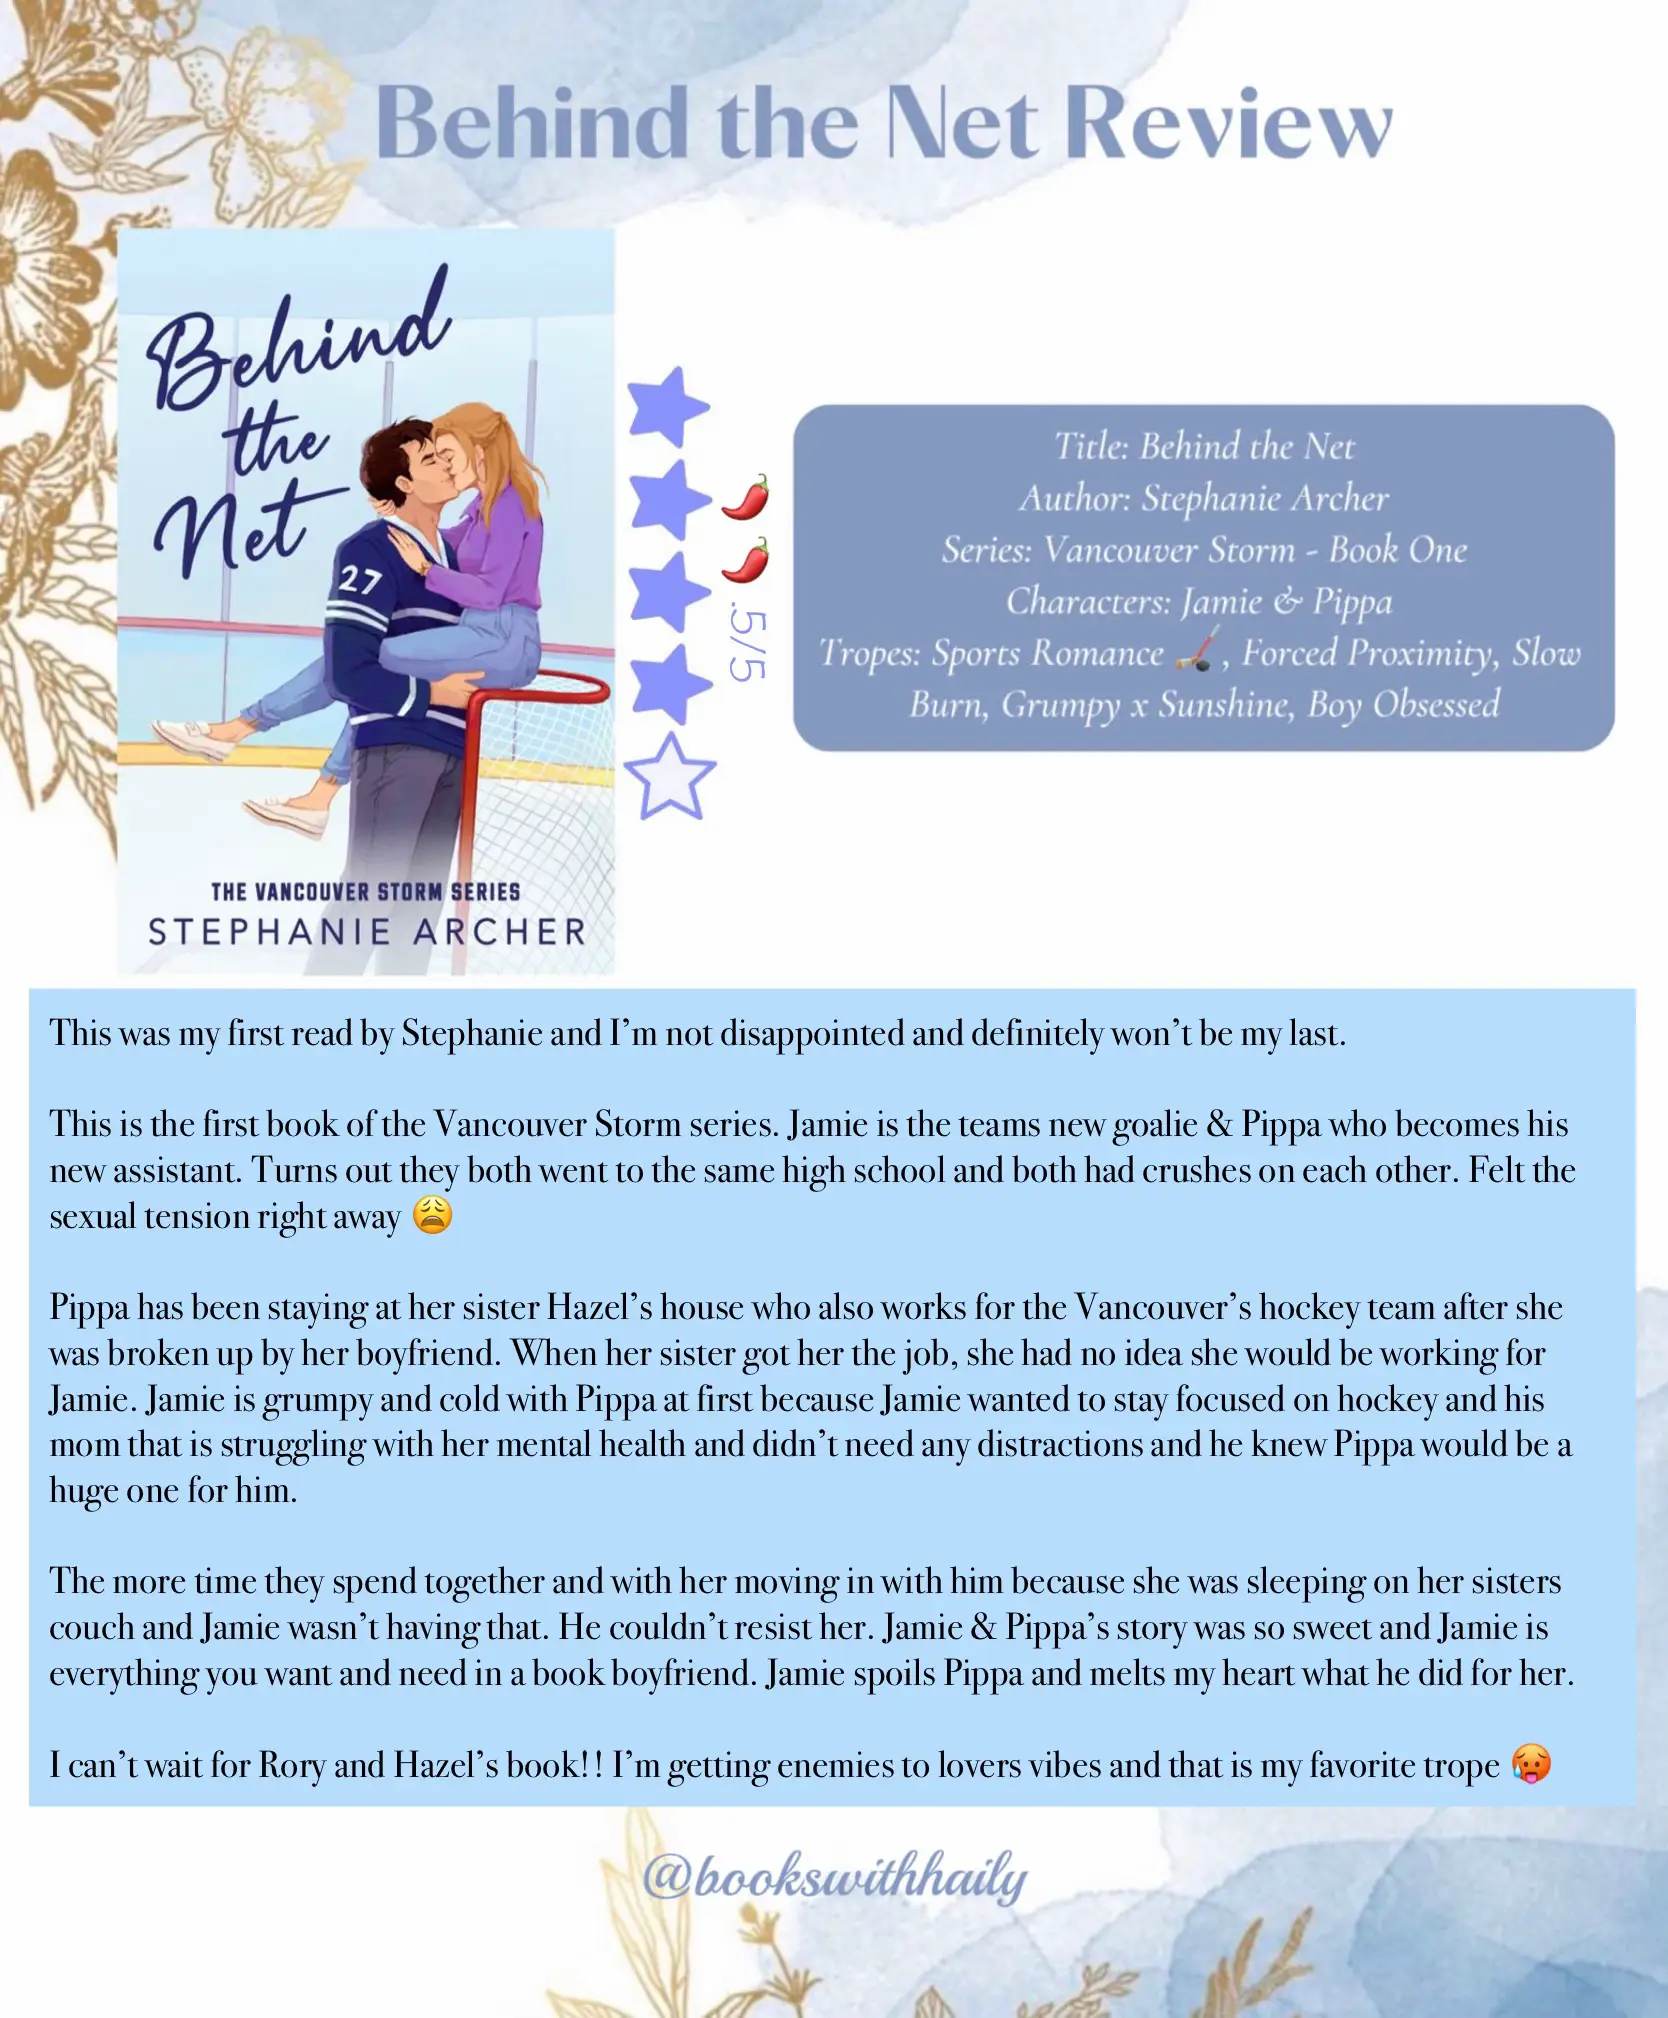 book lover review of Behind the Net by Stephanie Archer - Lemon8